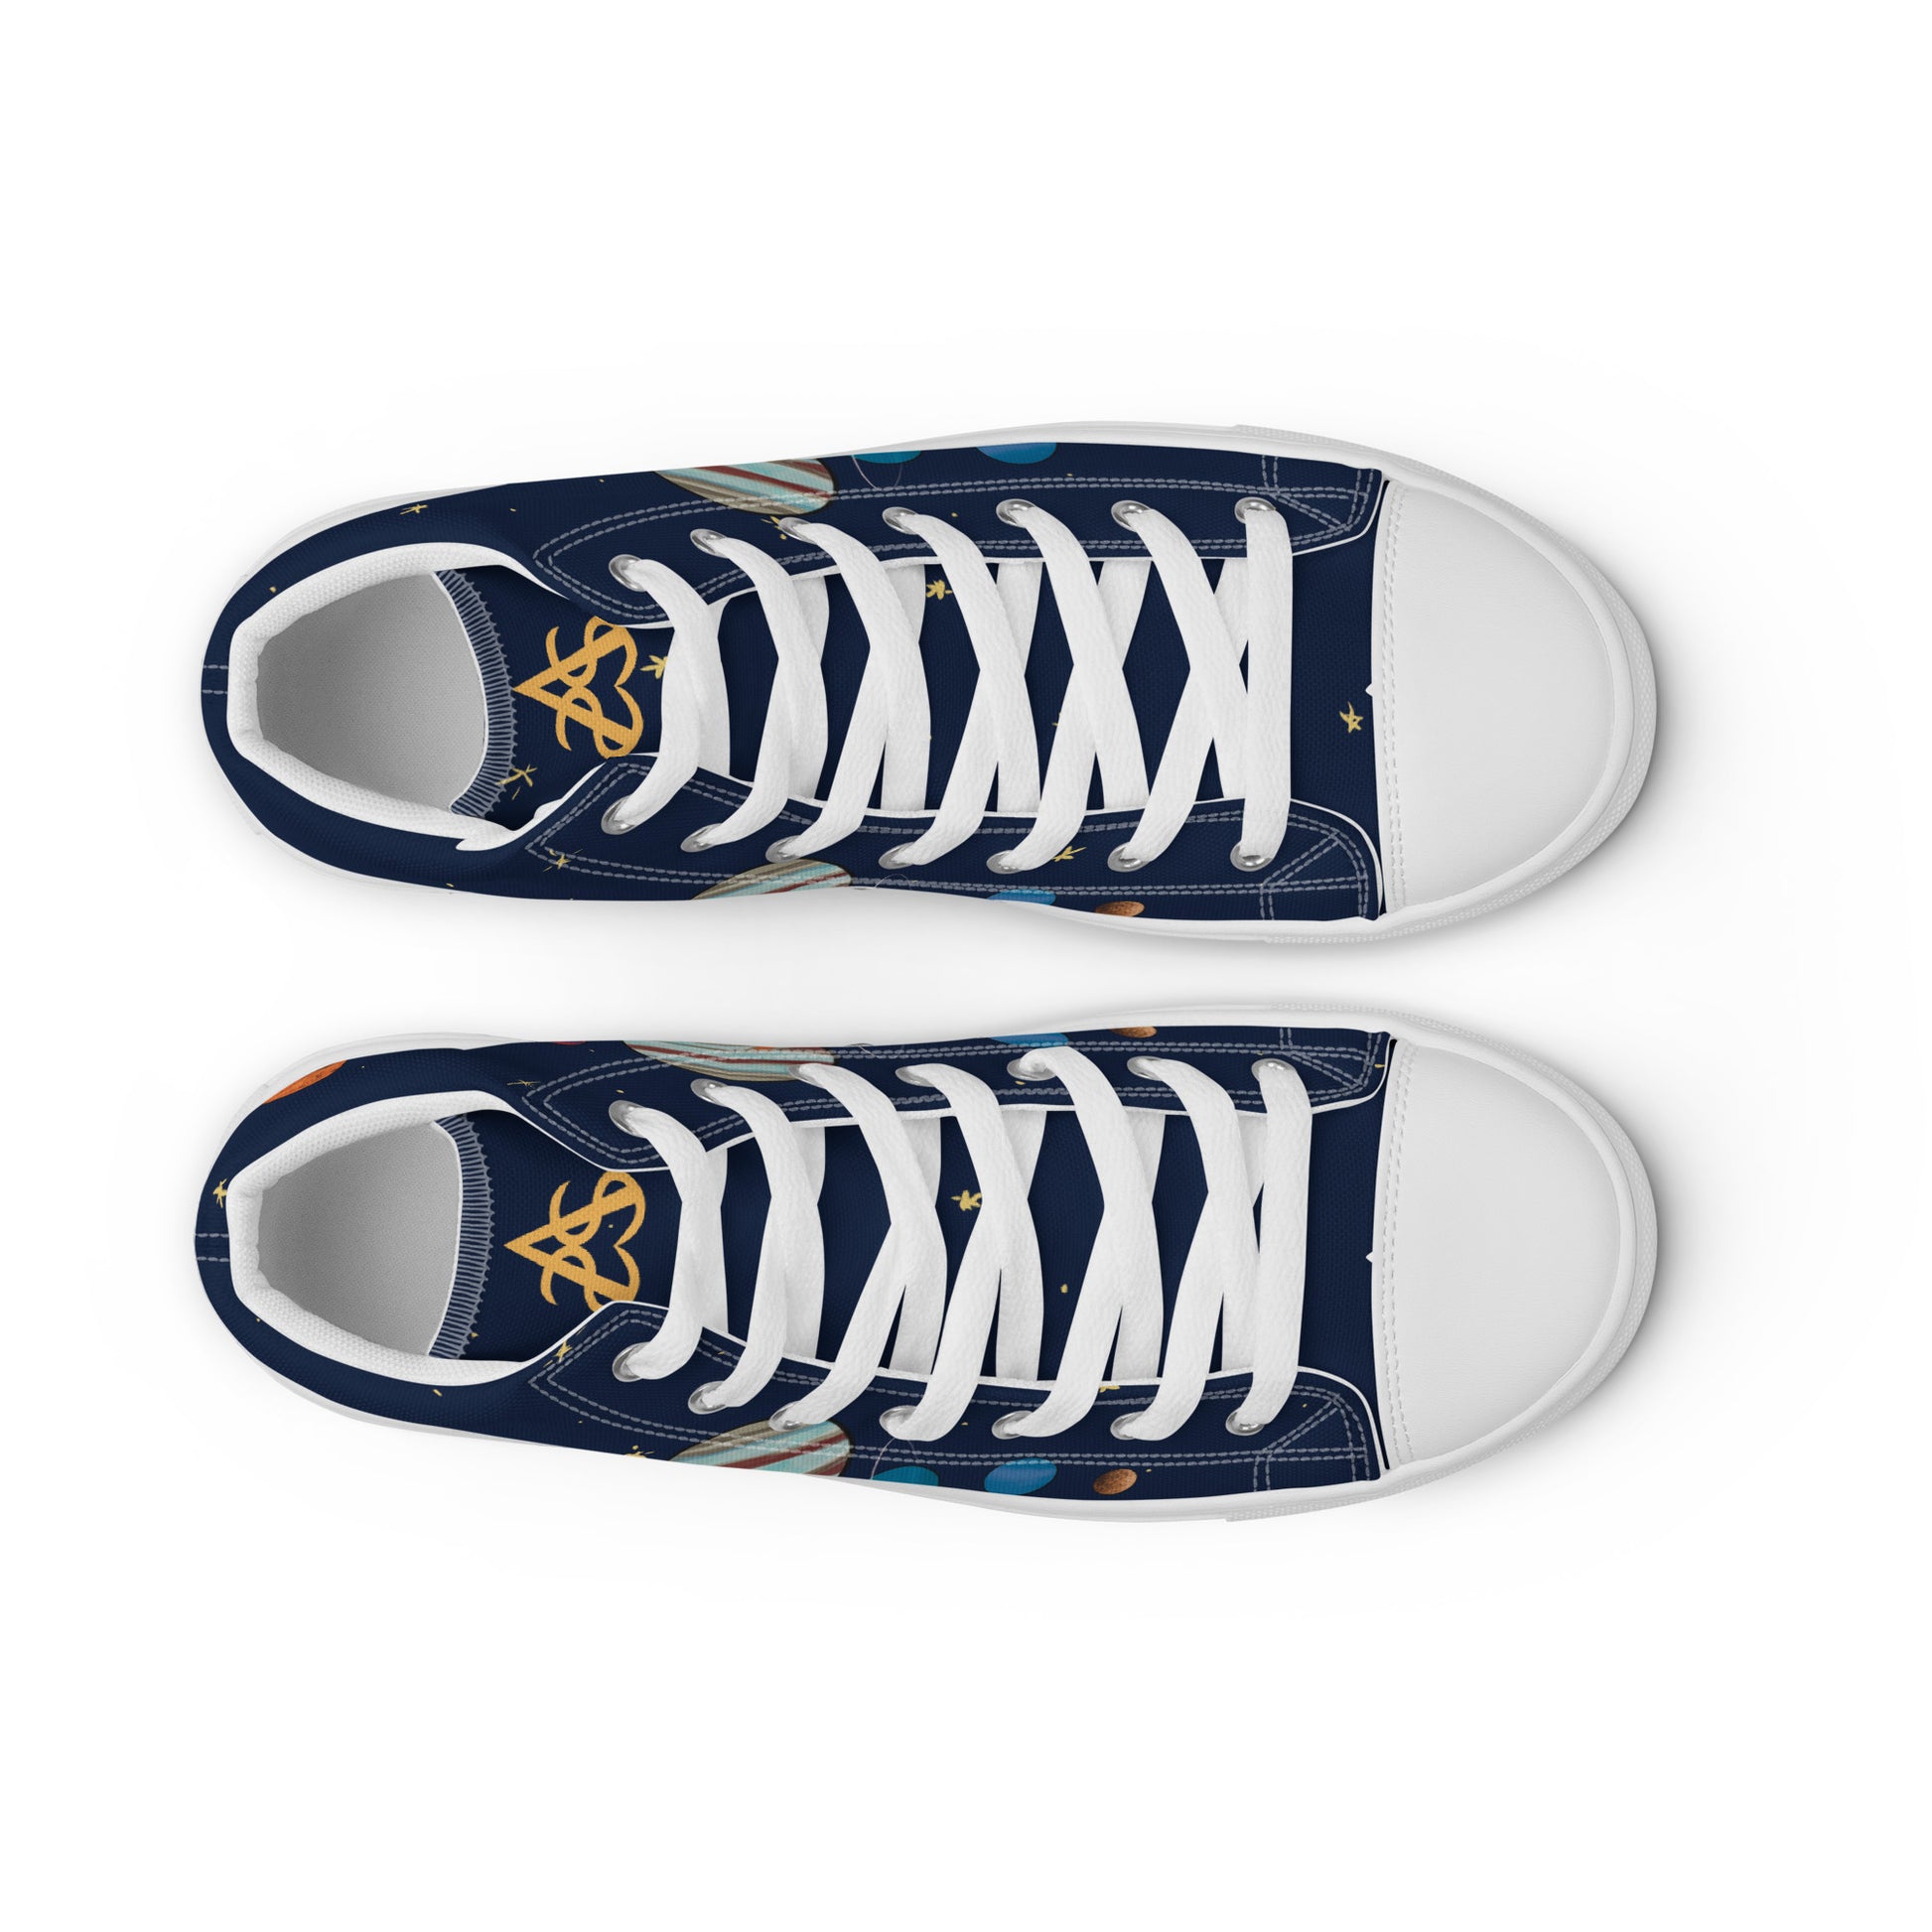 Top view: A pair of high top shoes with painted solar system and starry background with white laces.